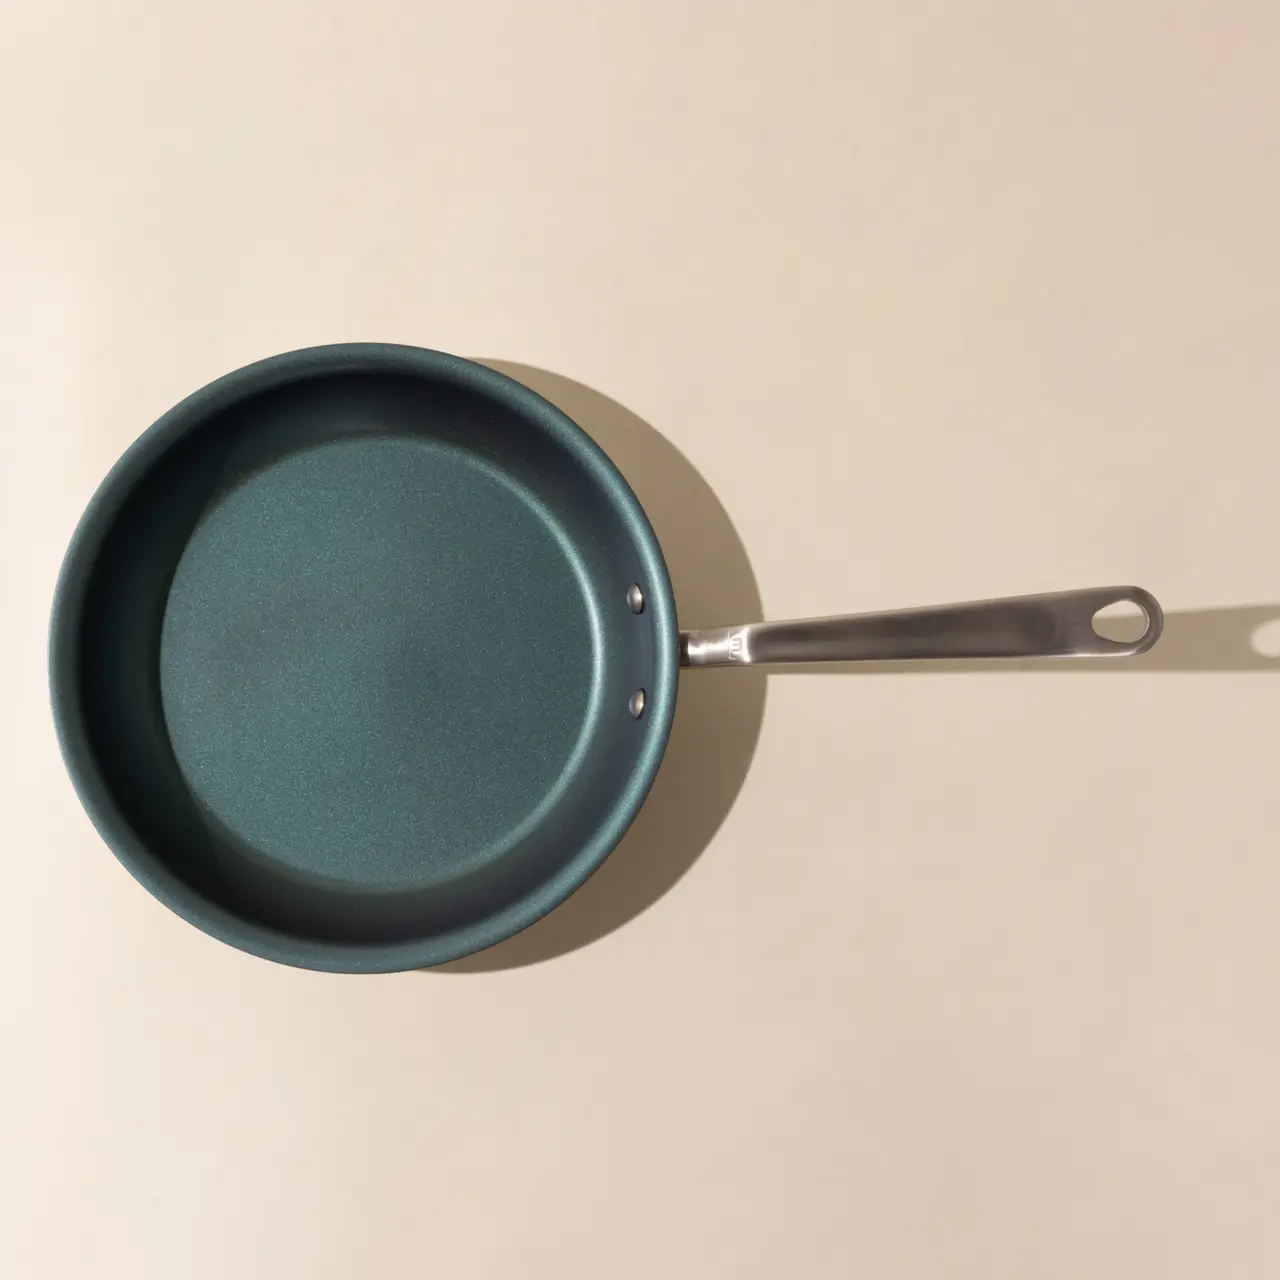 A non-stick frying pan with a stainless steel handle is shown from above, casting a slight shadow on a beige surface.